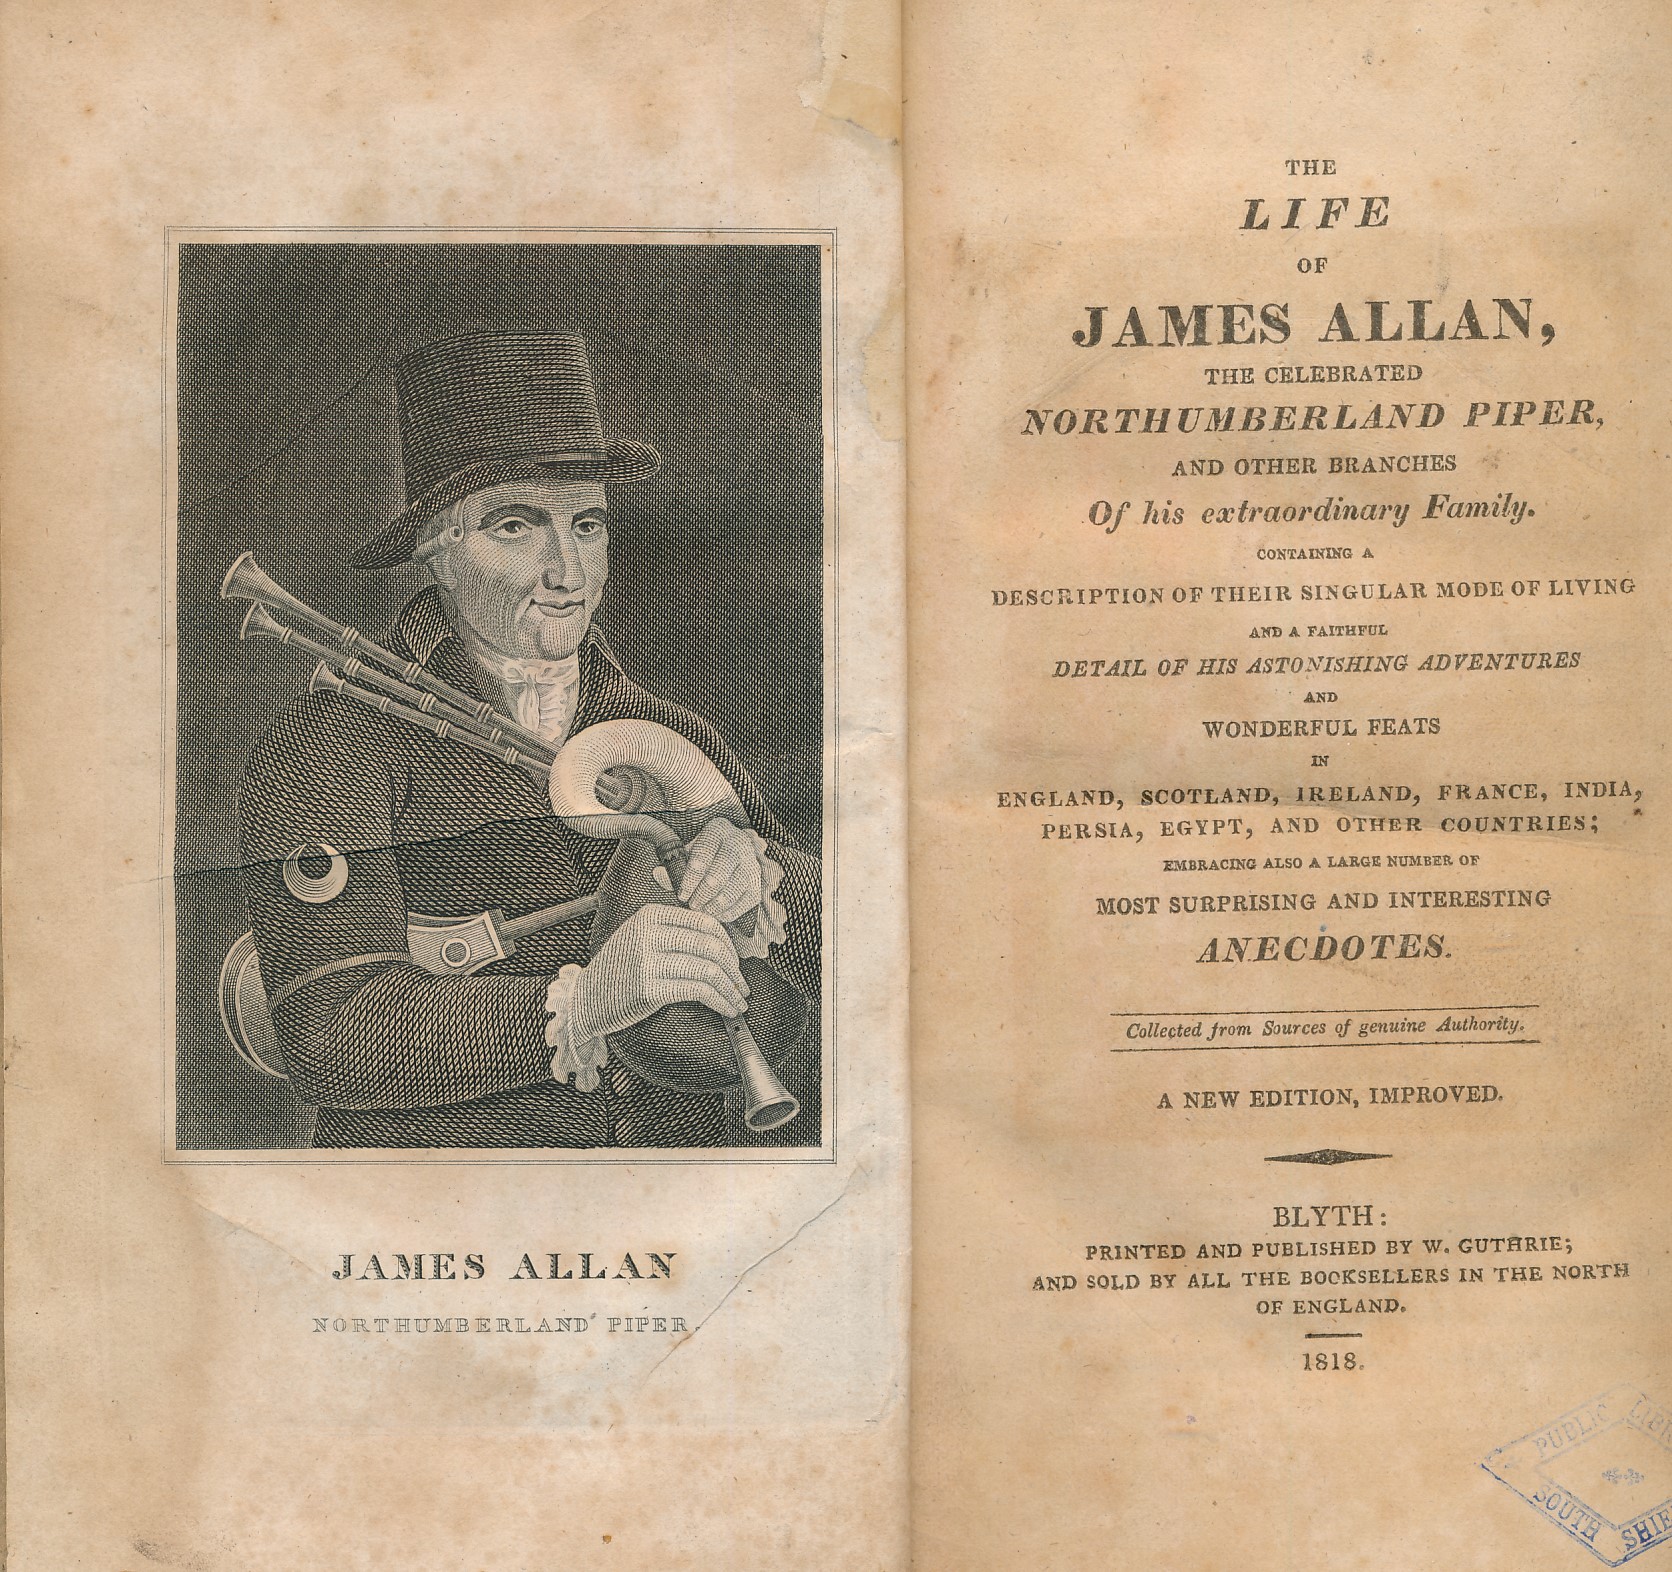 The Life of James Allan, the Celebrated Northumberland Piper, and other Branches of his Extraordinary Family.